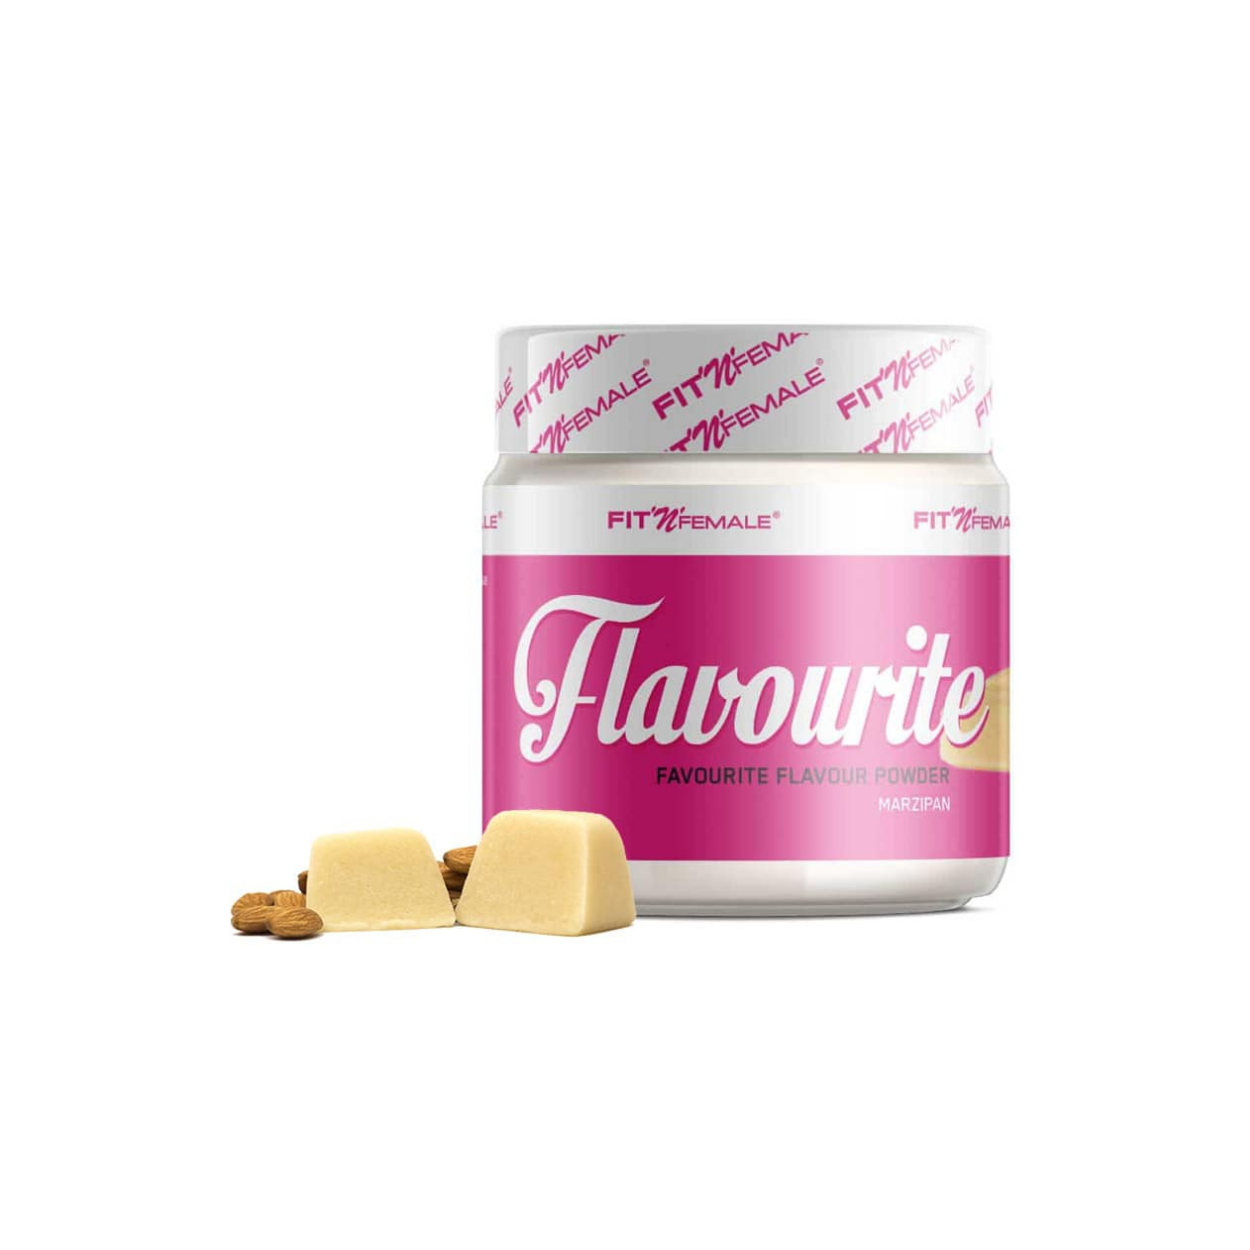 Fit n Female Flavourite Marzipan (200g)